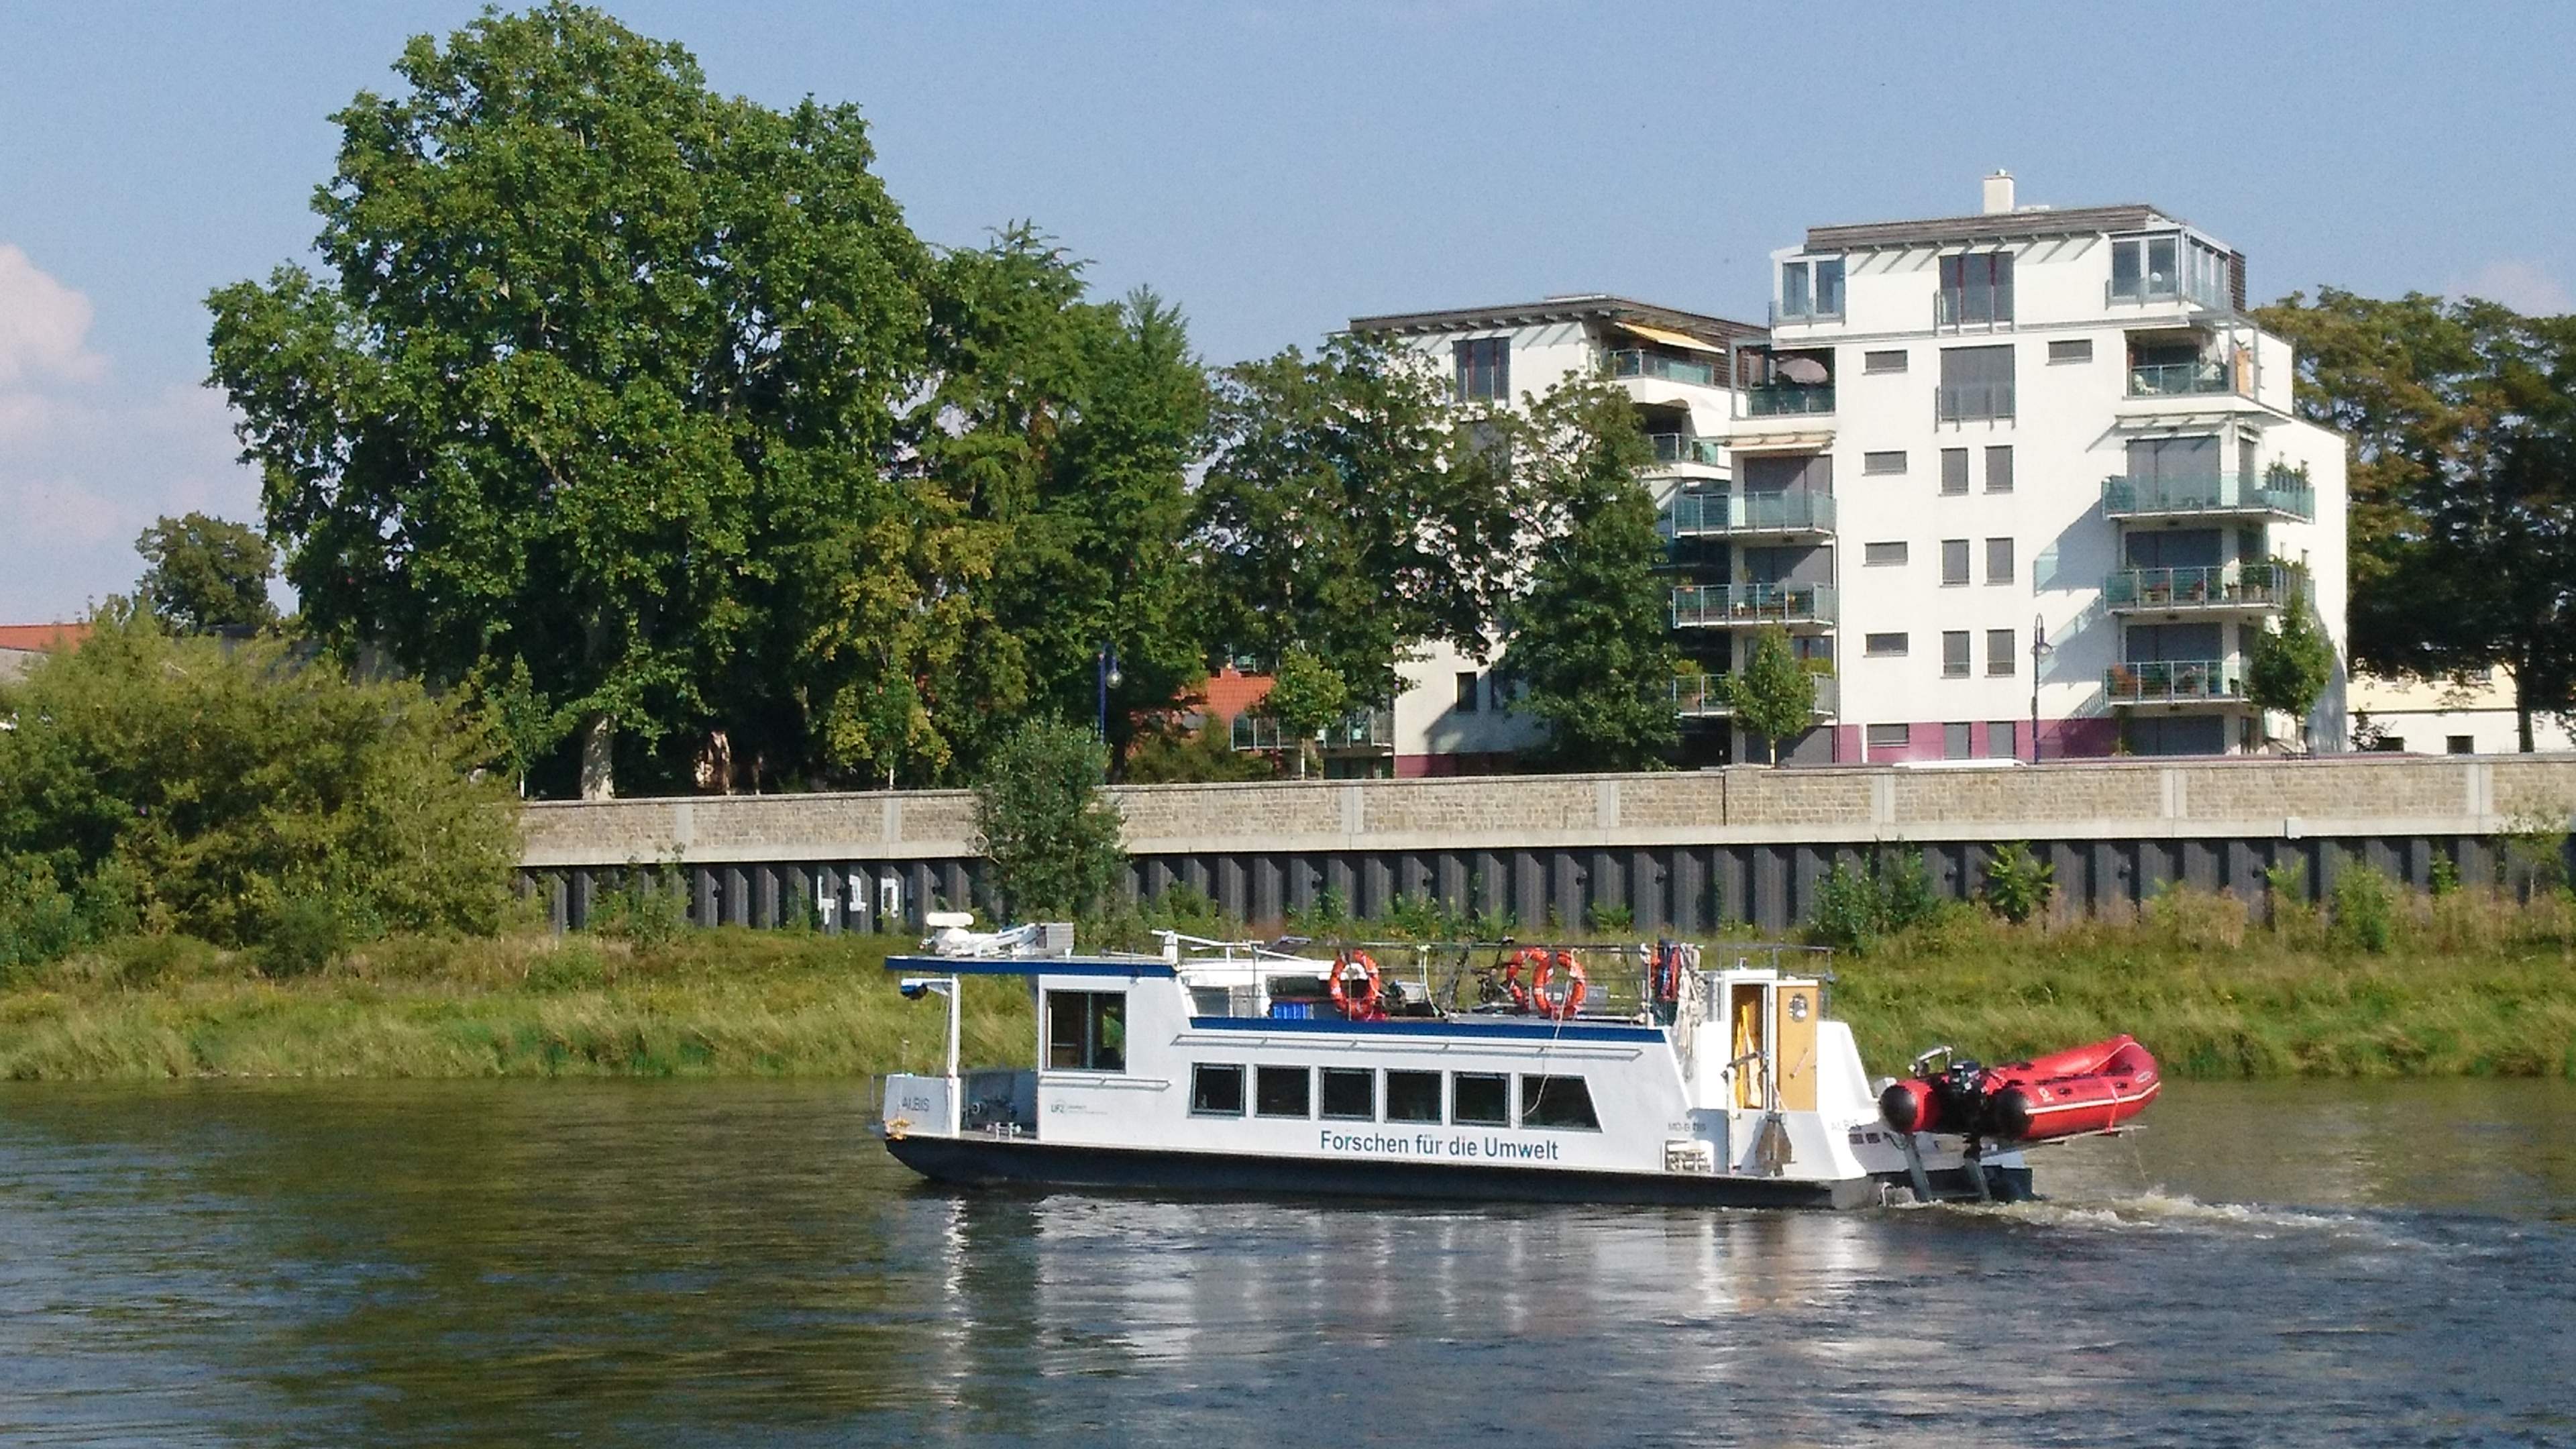 Albis at the Elbe River